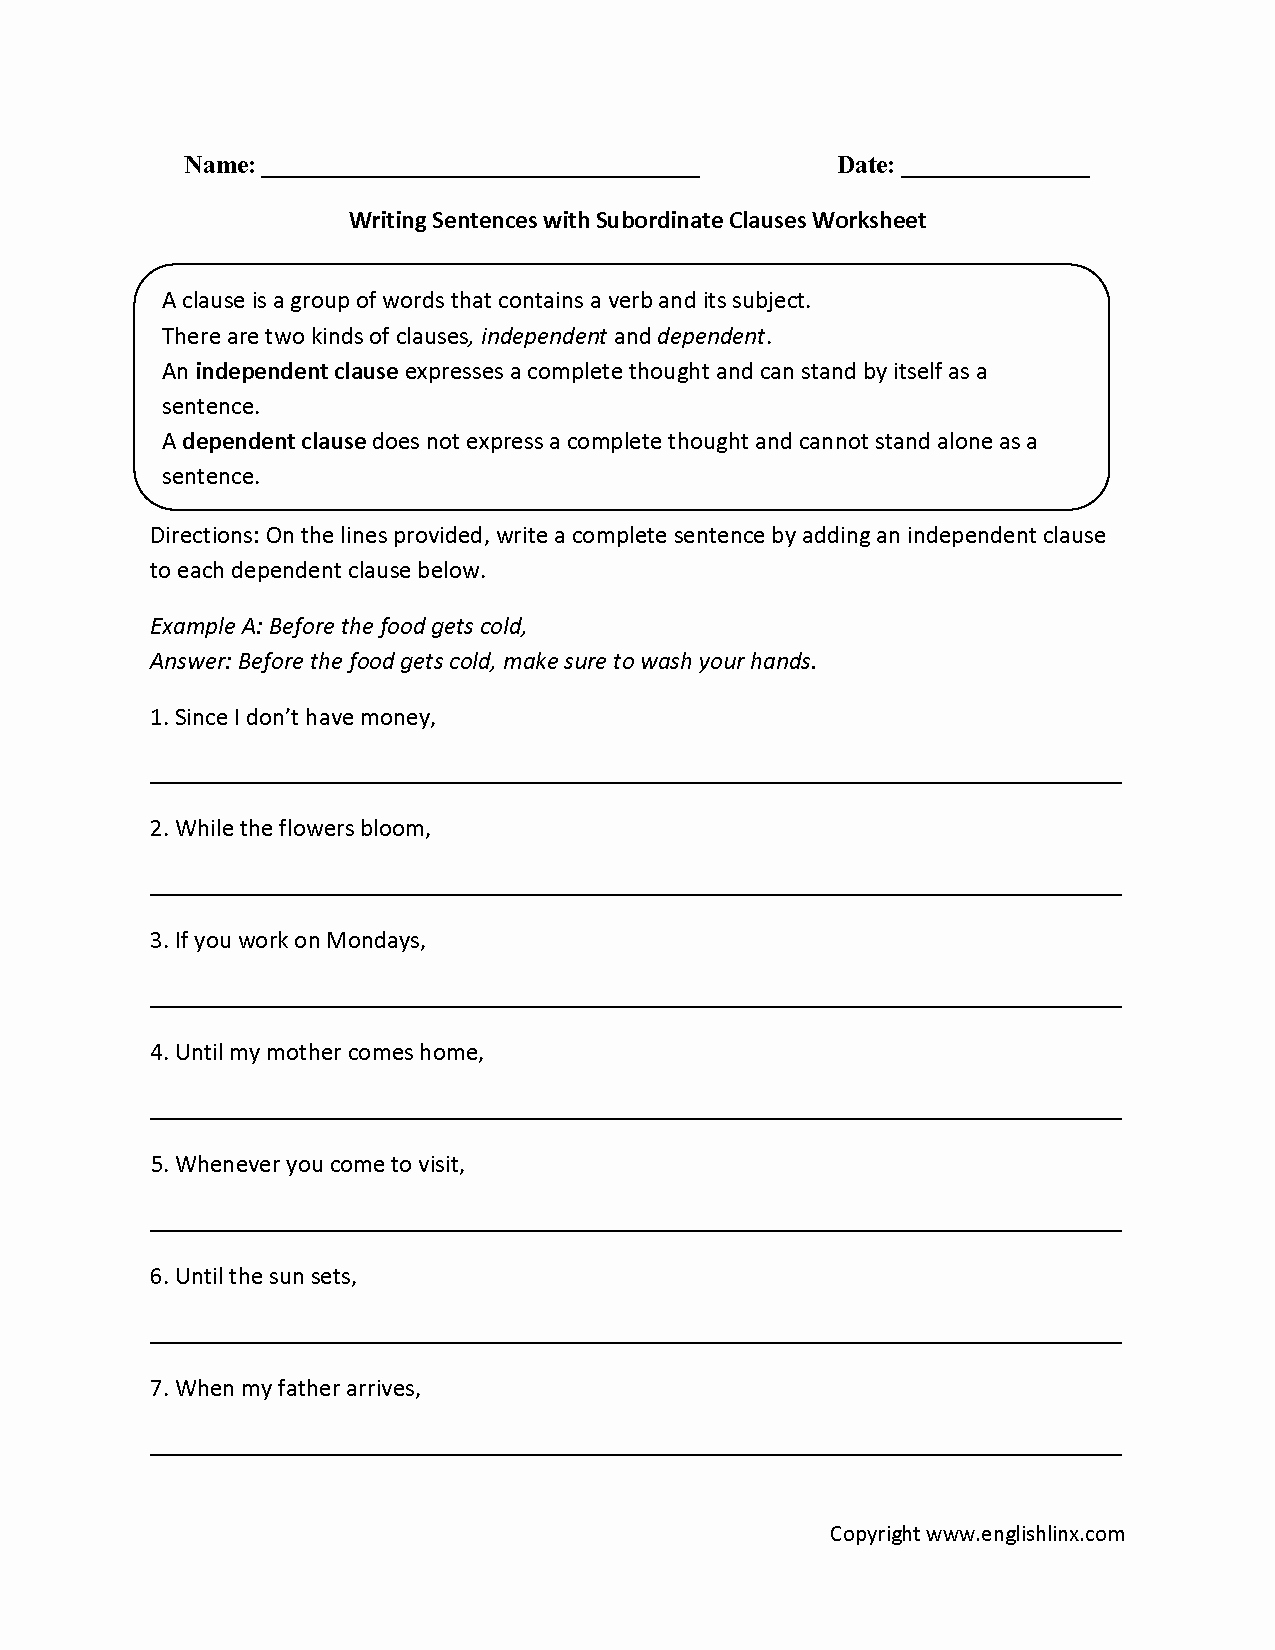 Phrase and Clause Worksheet New Writing Sentences with Subordinate Clauses Worksheet